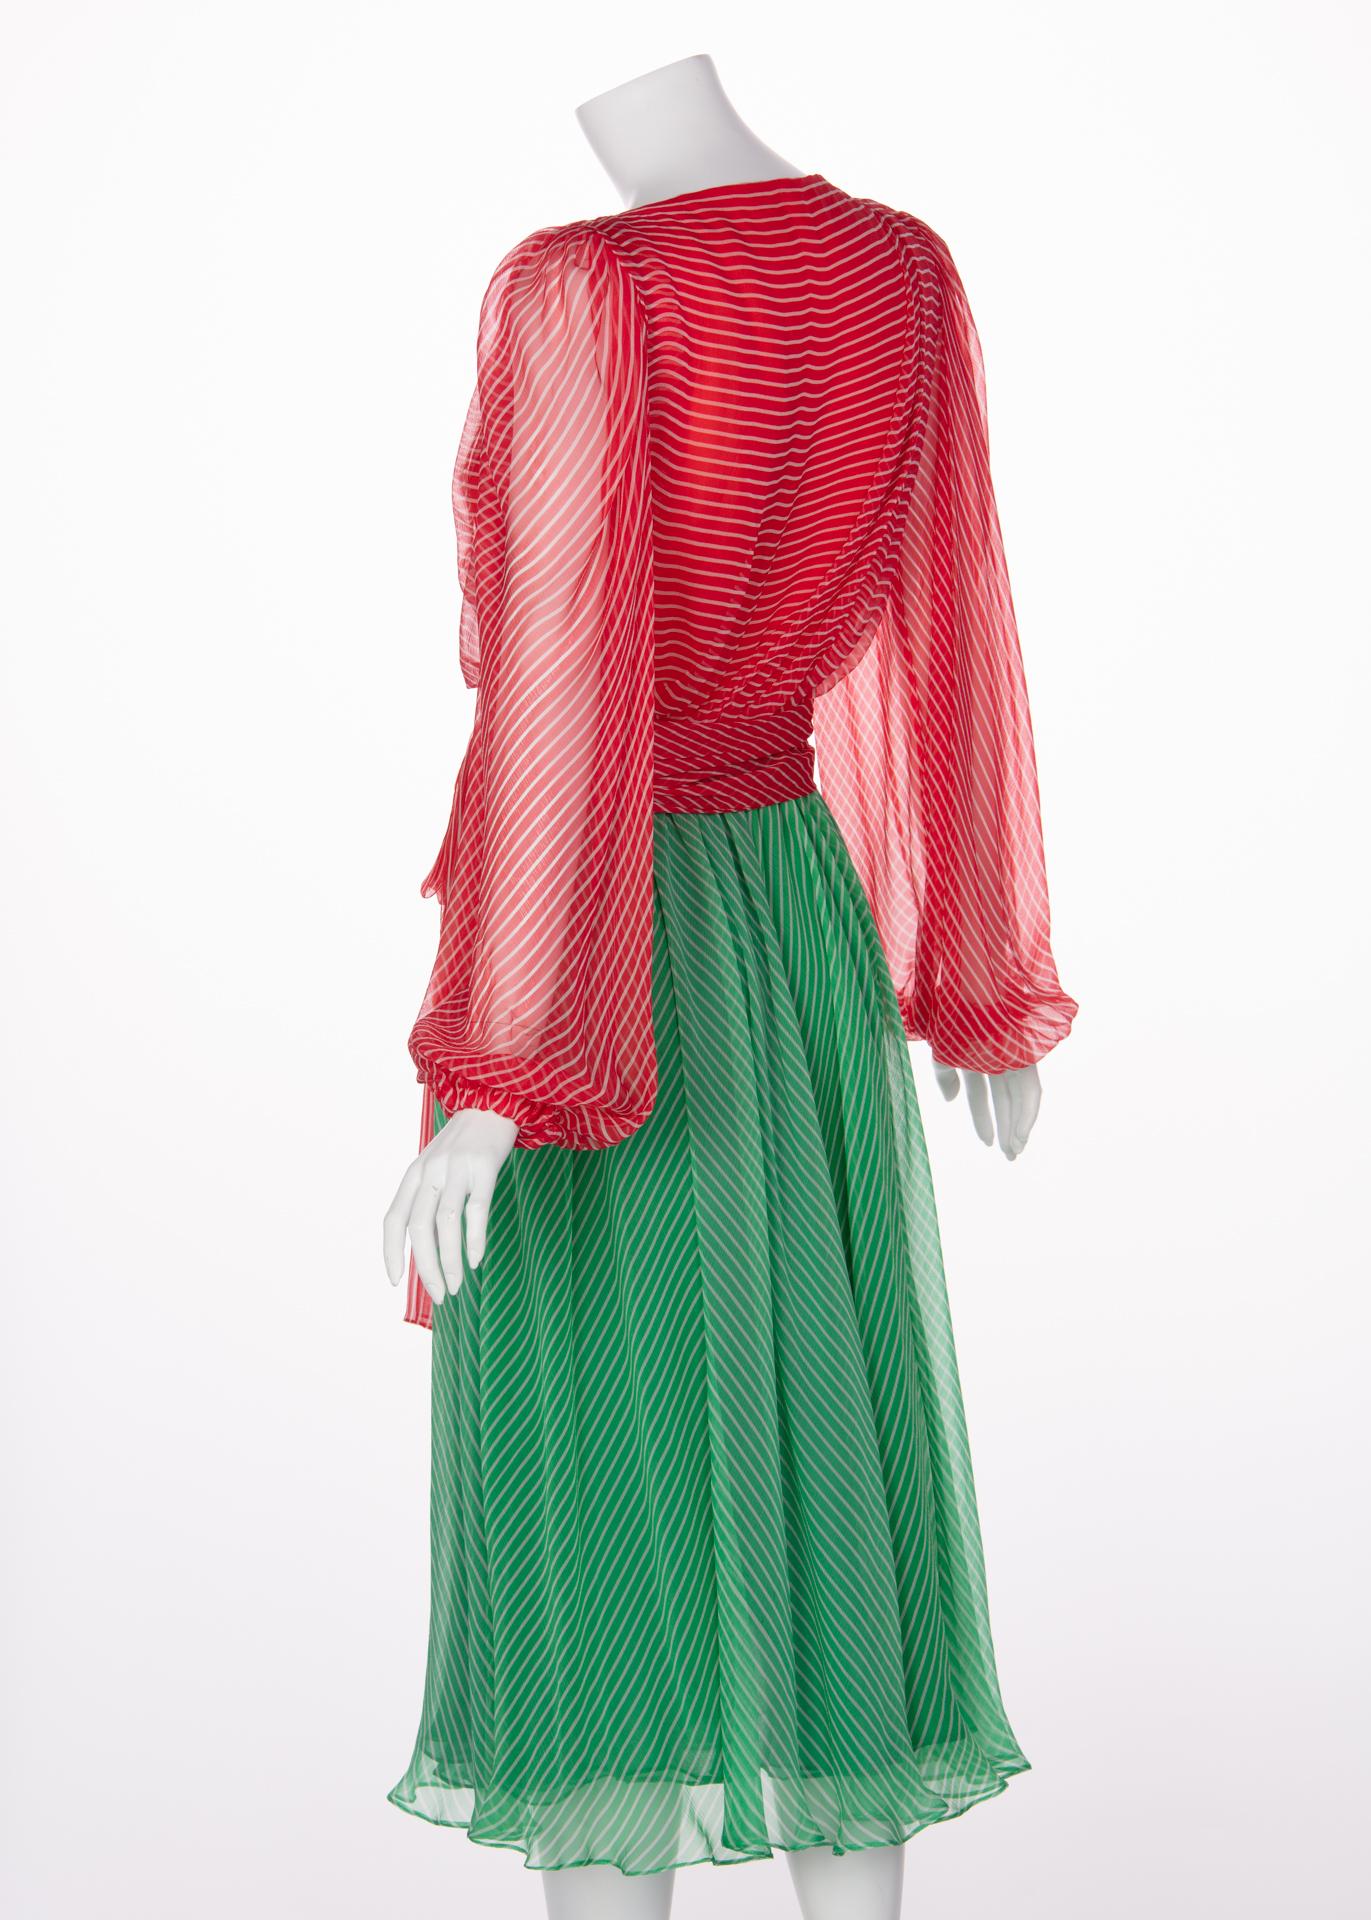 Yves Saint Laurent YSL Haute Couture Red / Green Stripe Silk Chiffon Dress, 1991 In Excellent Condition For Sale In Boca Raton, FL